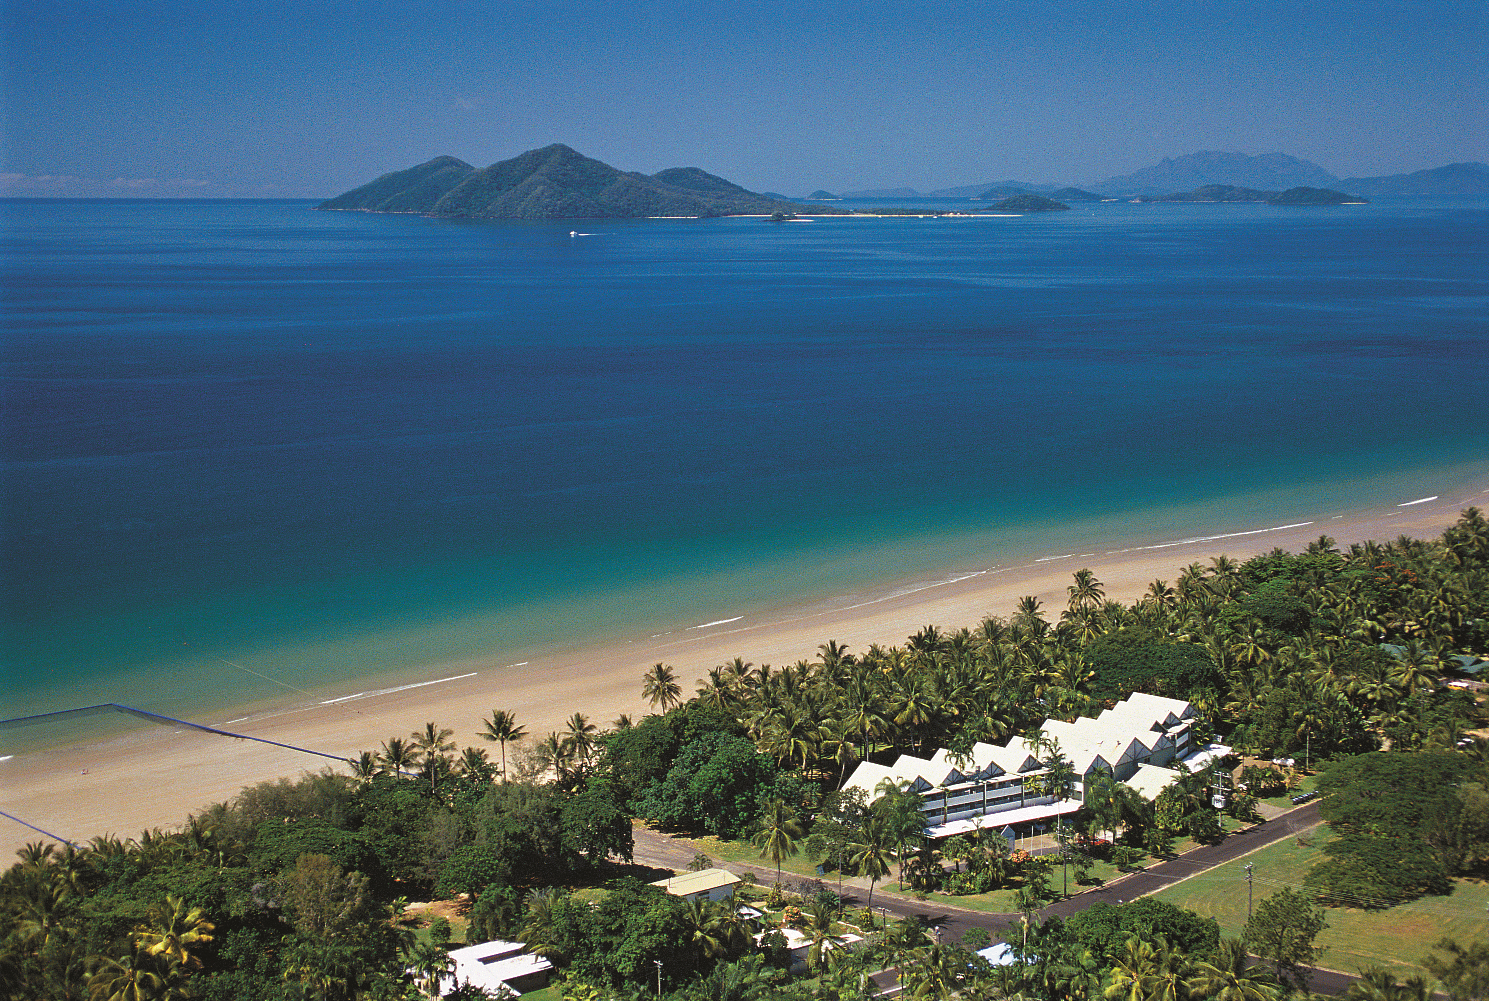 JLL Hotels & Hospitality Group exclusively appointed to offer for sale Castaways Resort & Spa, Mission Beach, Queensland